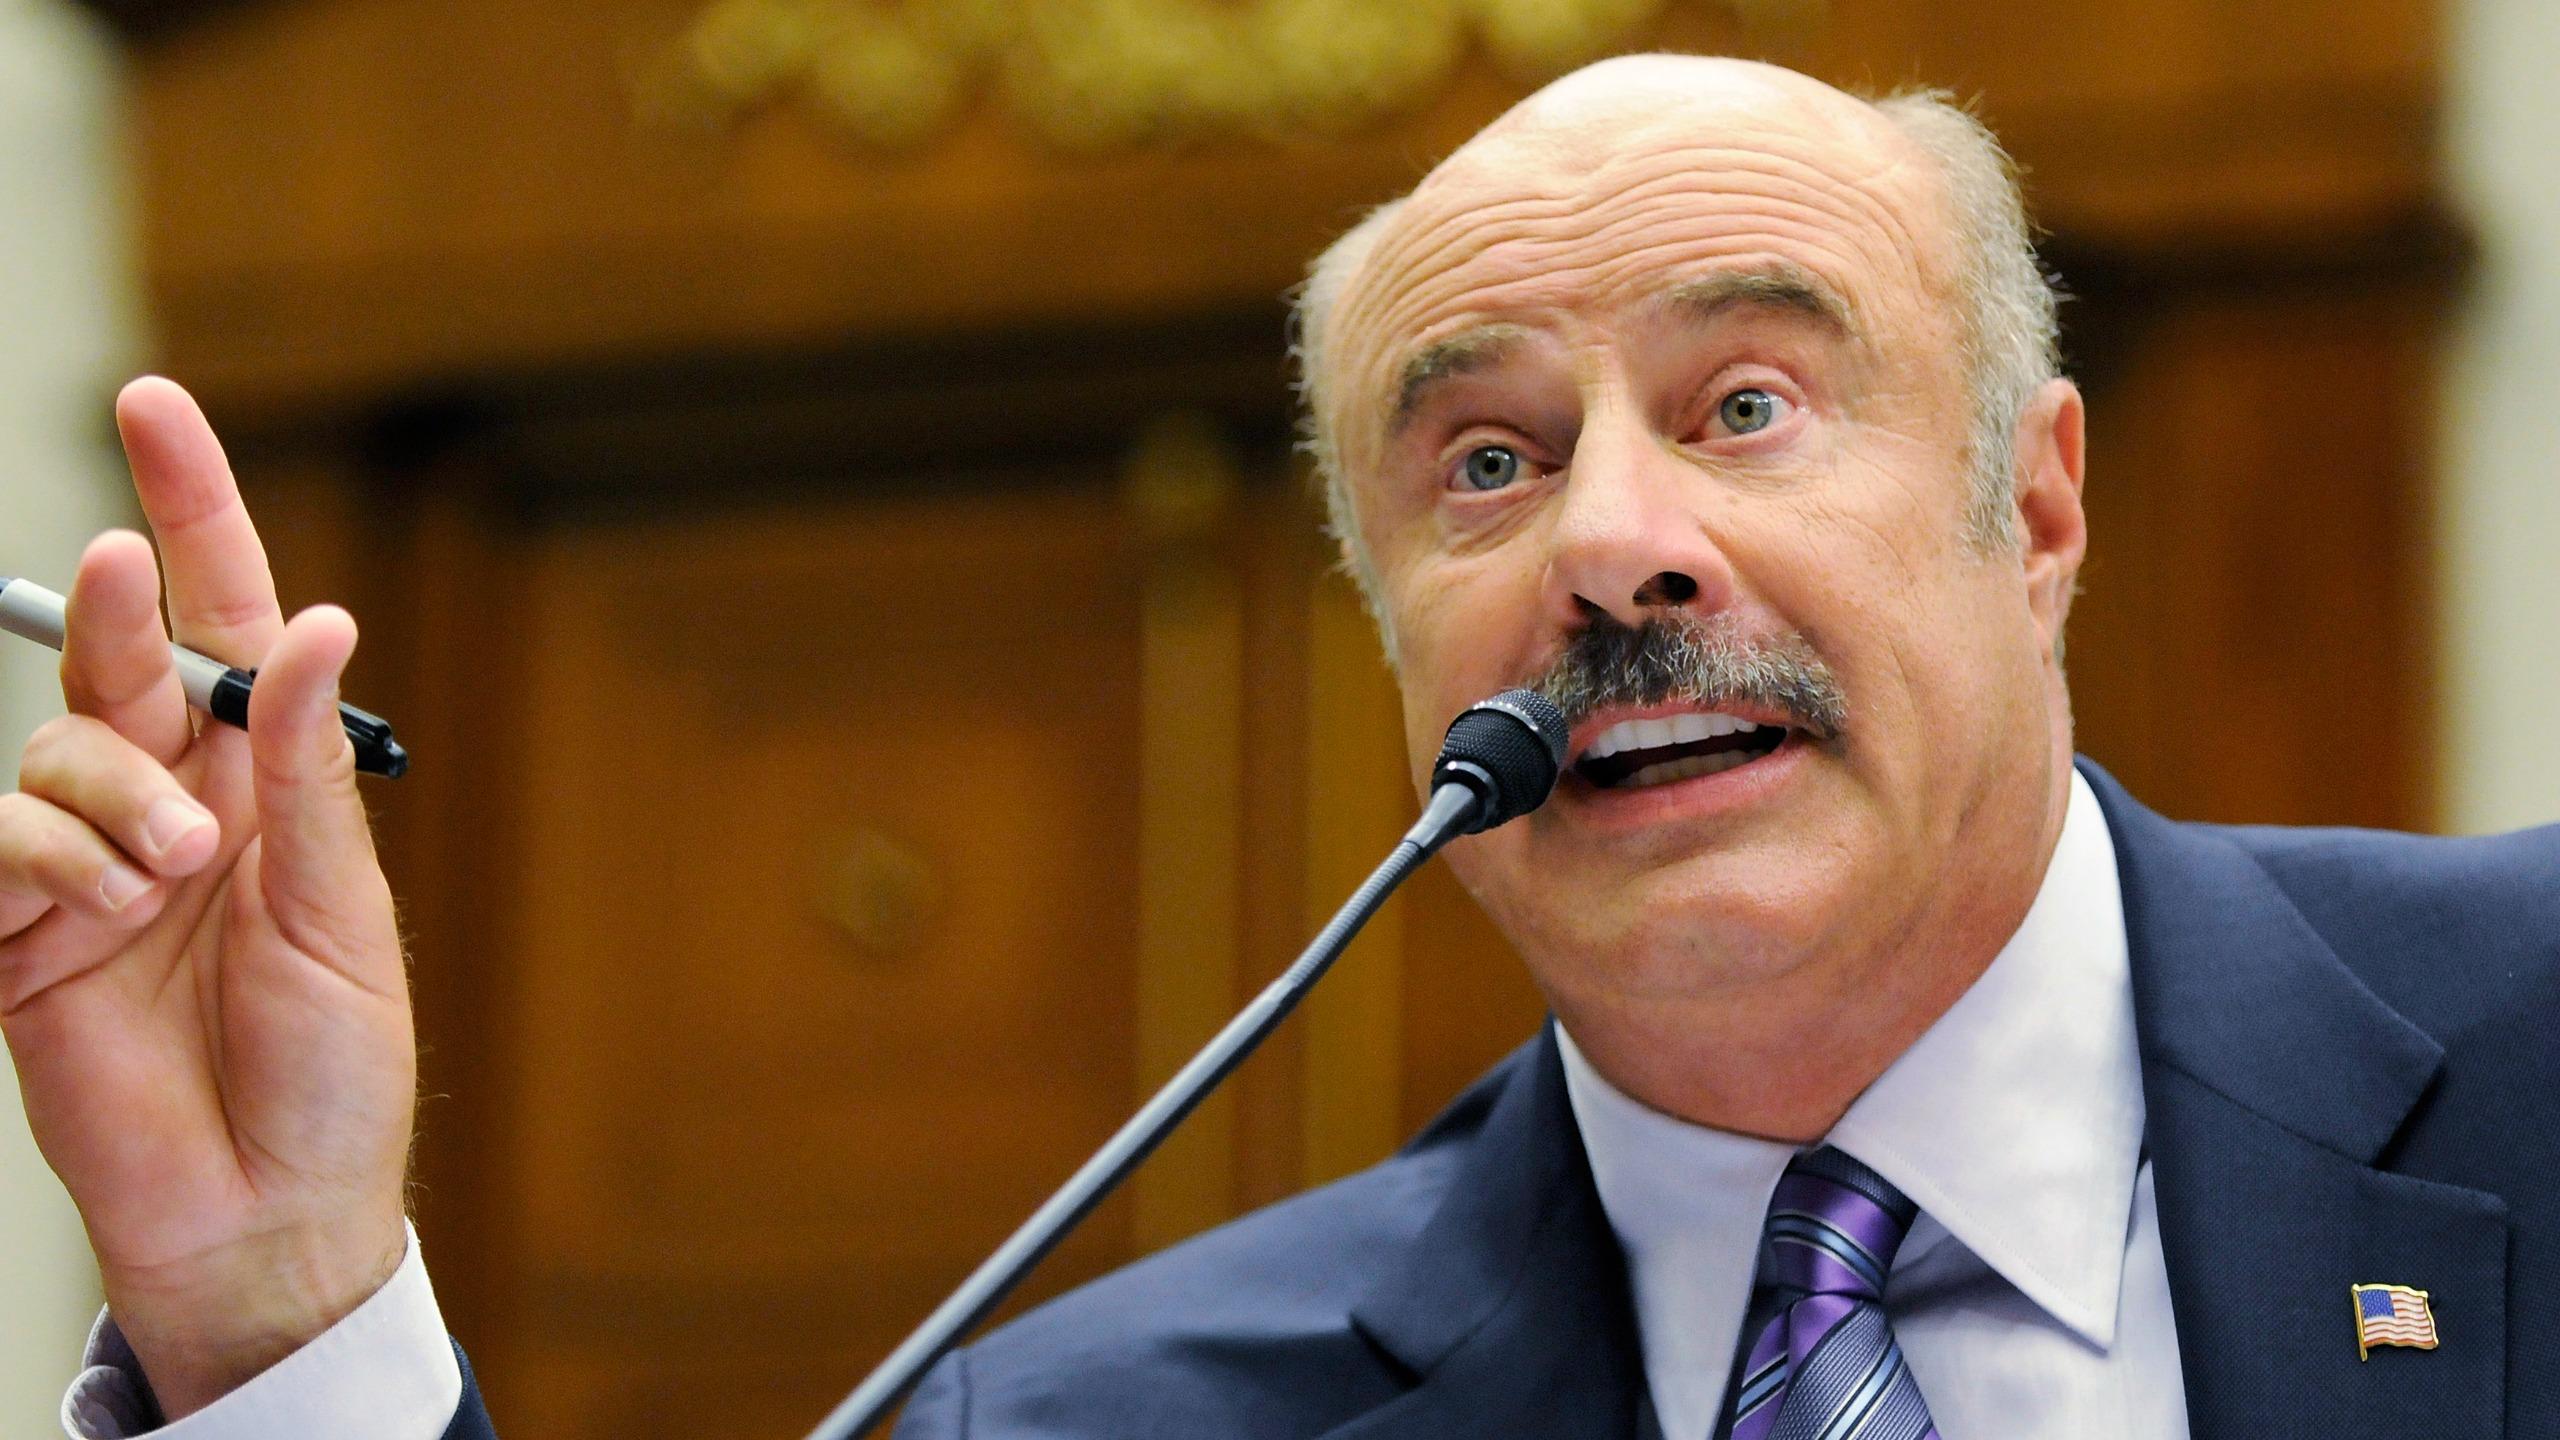 TMZ: Dr. Phil Crashed Into a Skateboarder With His Car